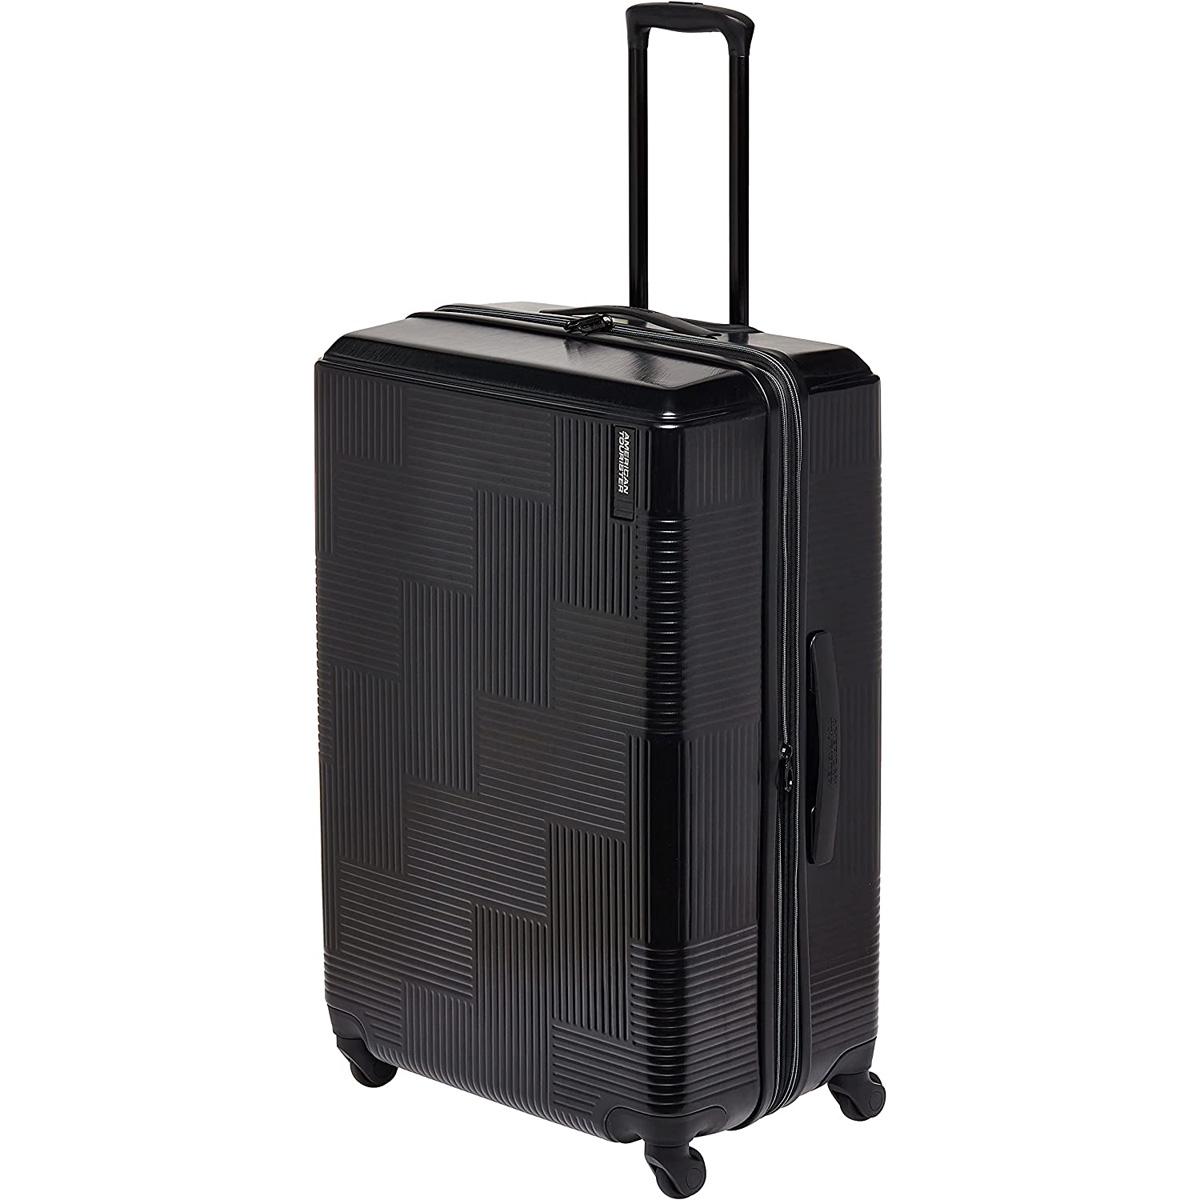 American Tourister Stratum XLT Expandable Hardside Luggage for $55.15 Shipped